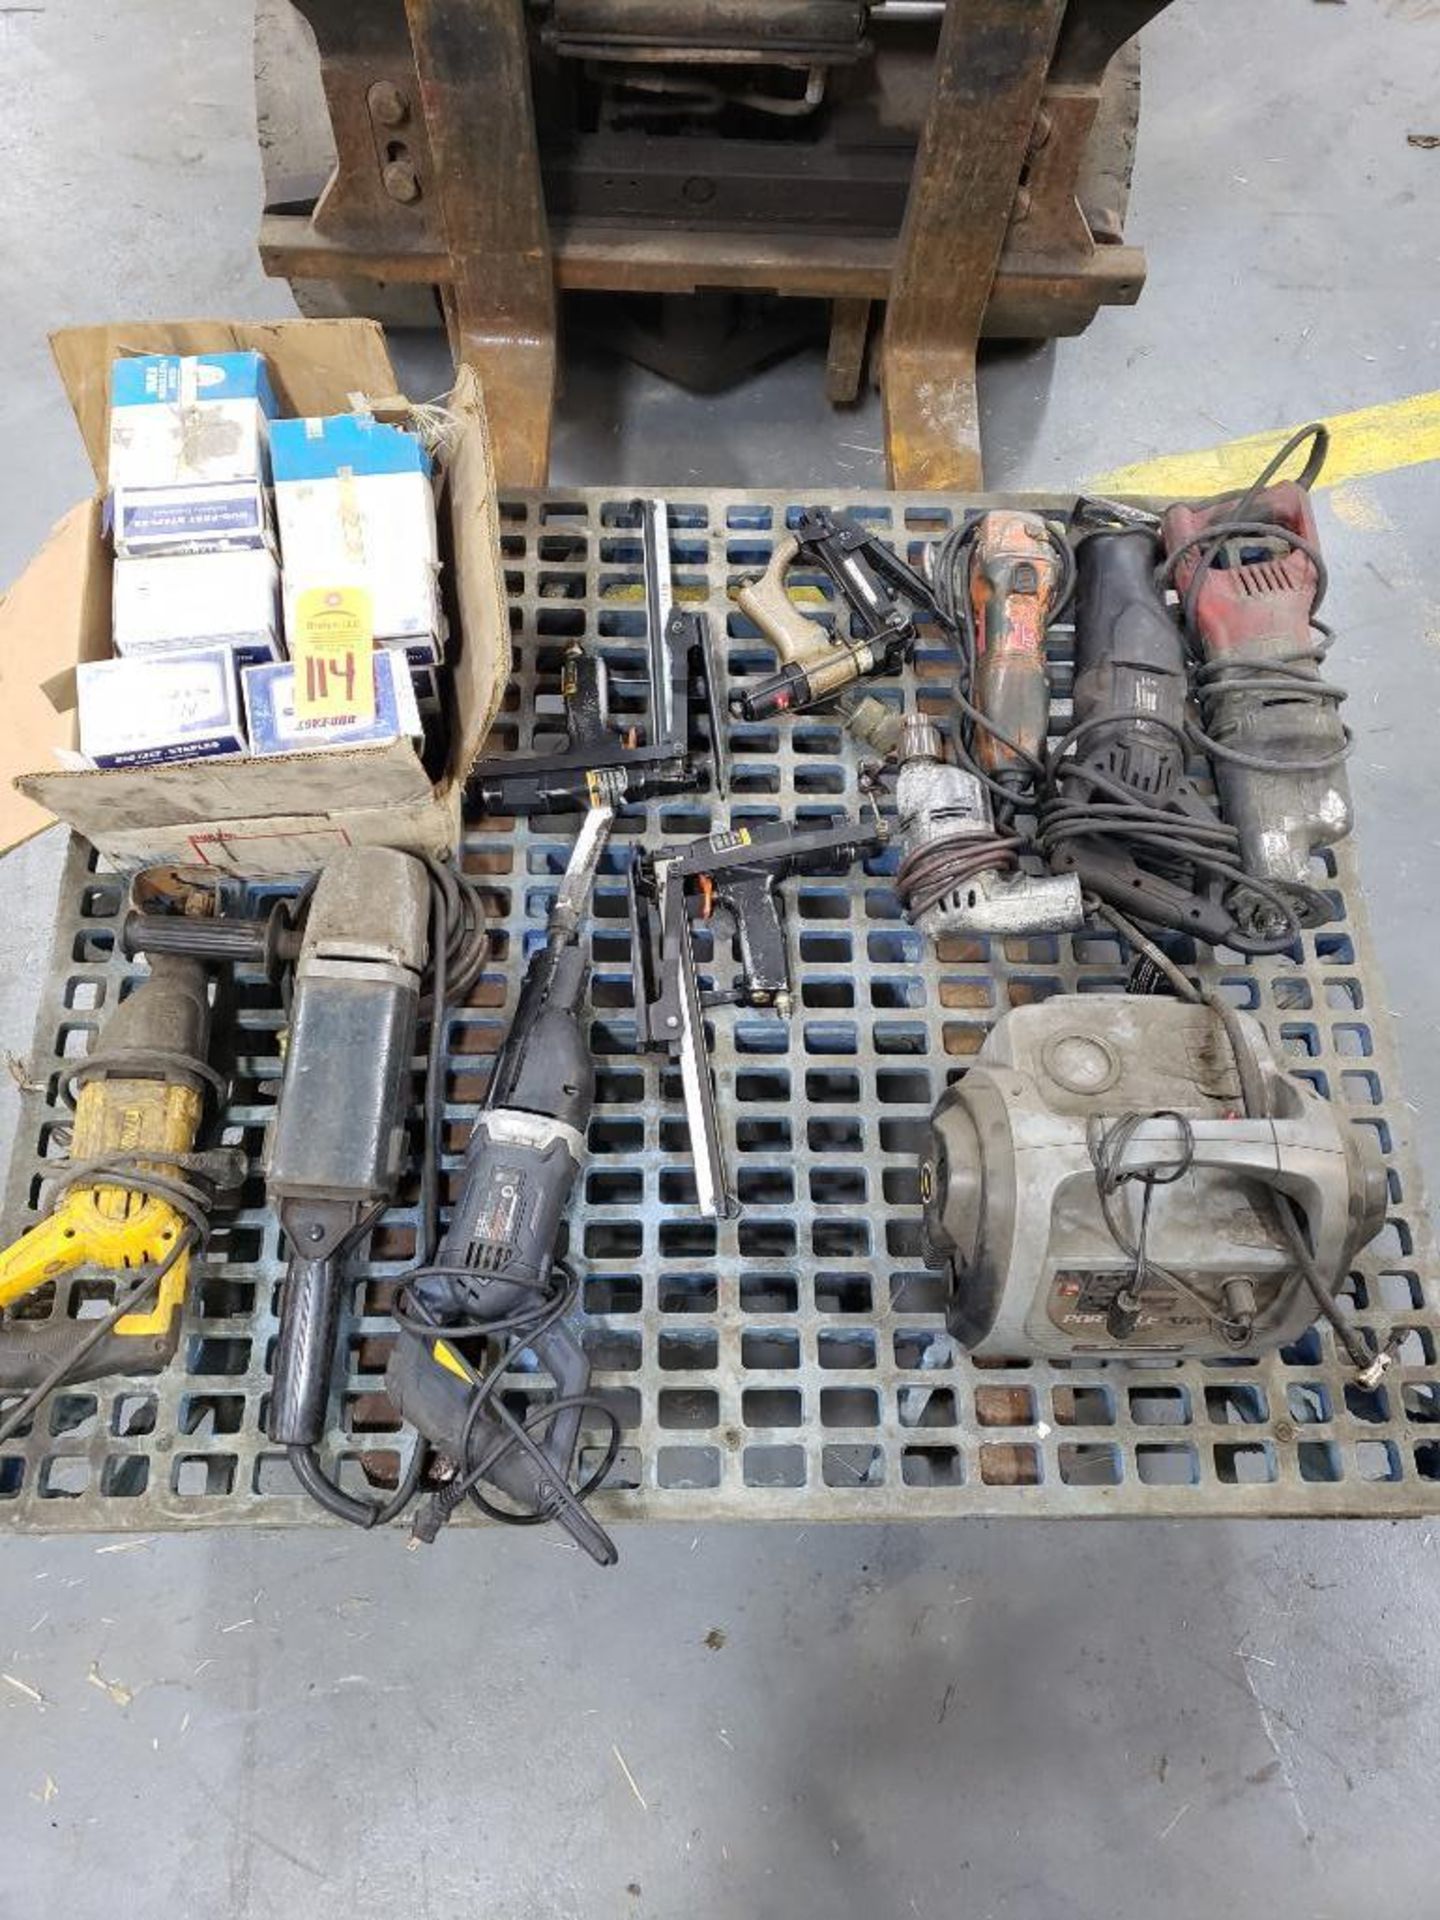 Pallet of assorted power tools, staple guns, box of staples, and charger.